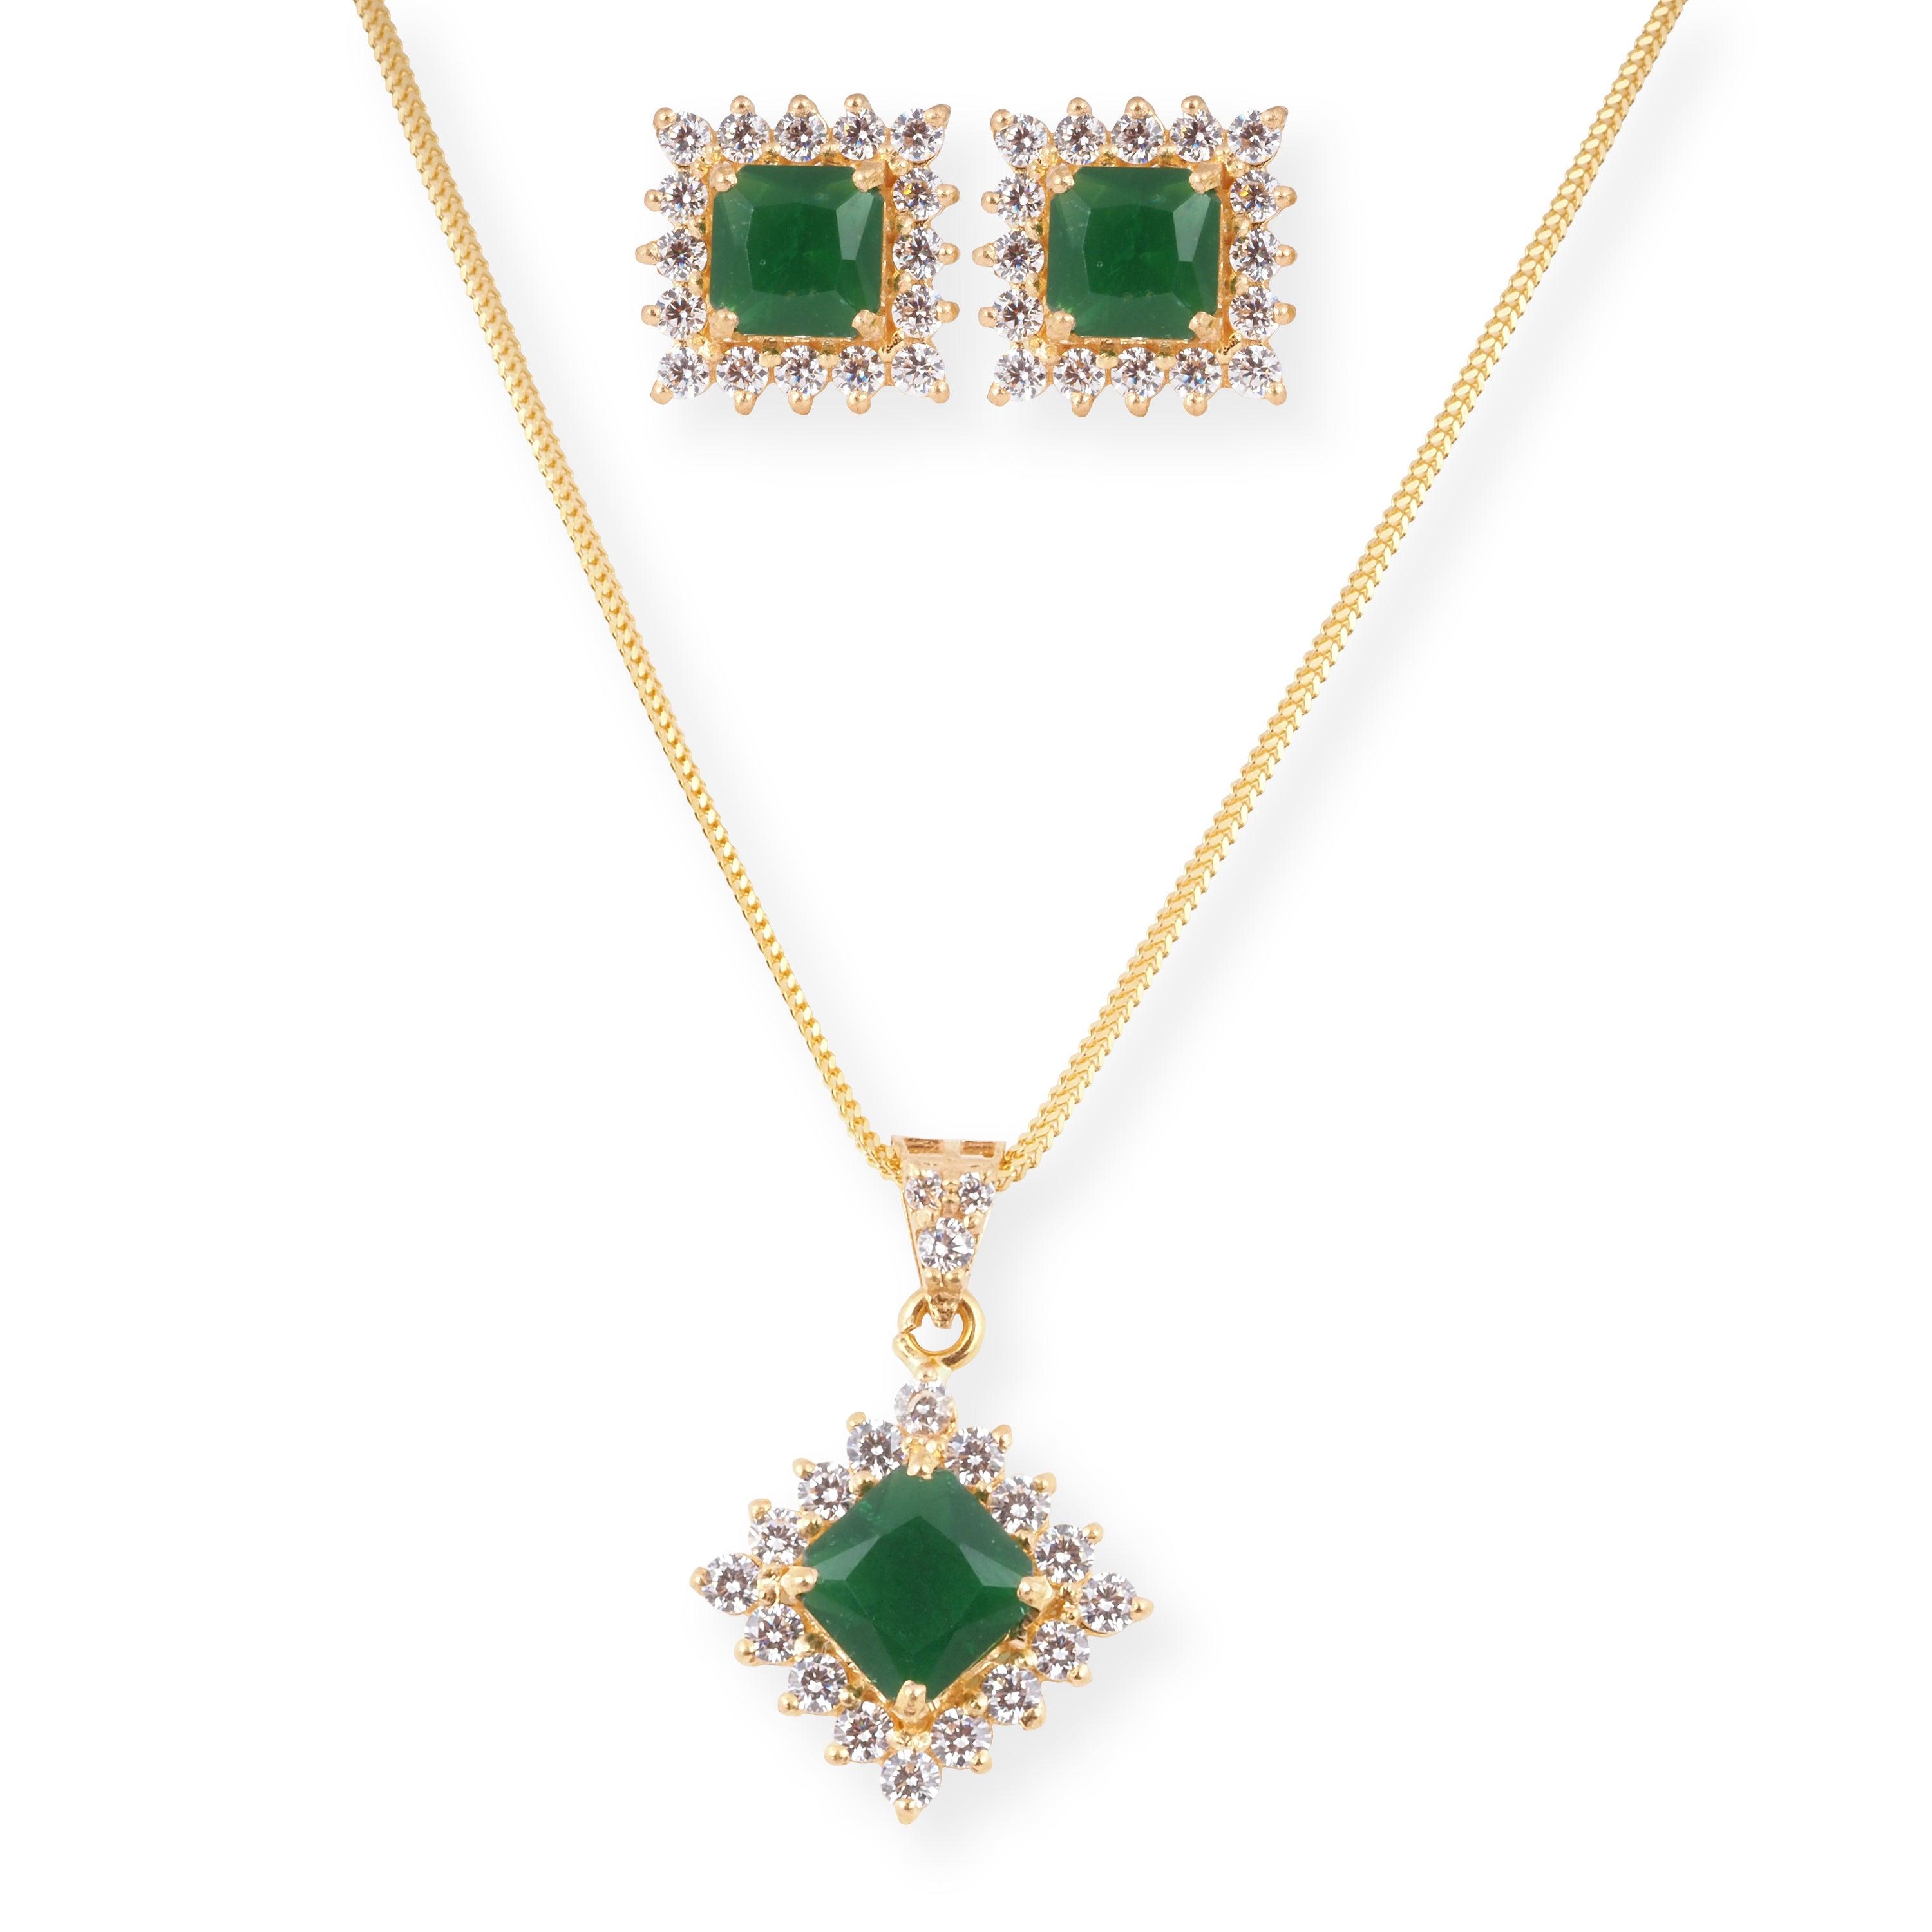 22ct Gold Set with Green and Cubic Zirconia Stones (Pendant + Chain + Earrings) P-8004 E-8004A - Minar Jewellers